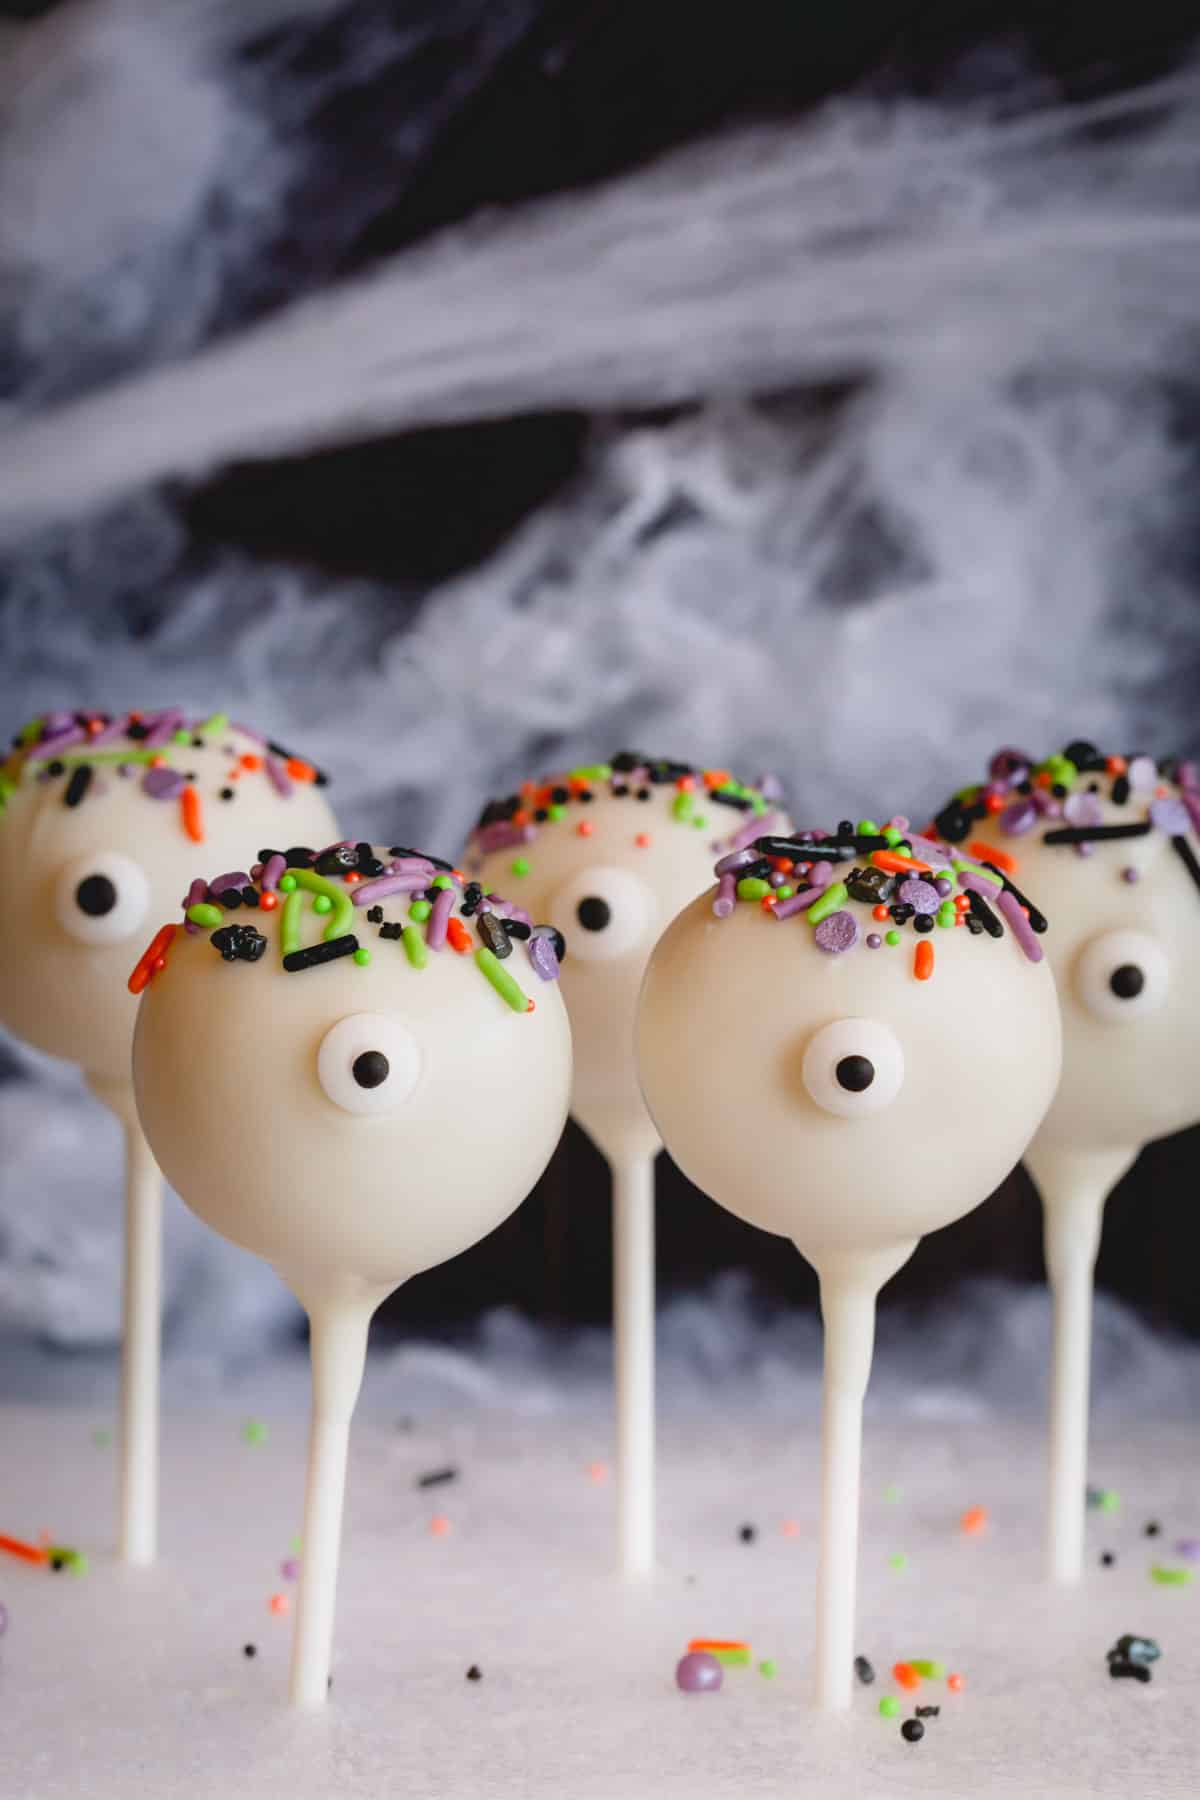 Halloween cake pops with sprinkles and candy eyes.